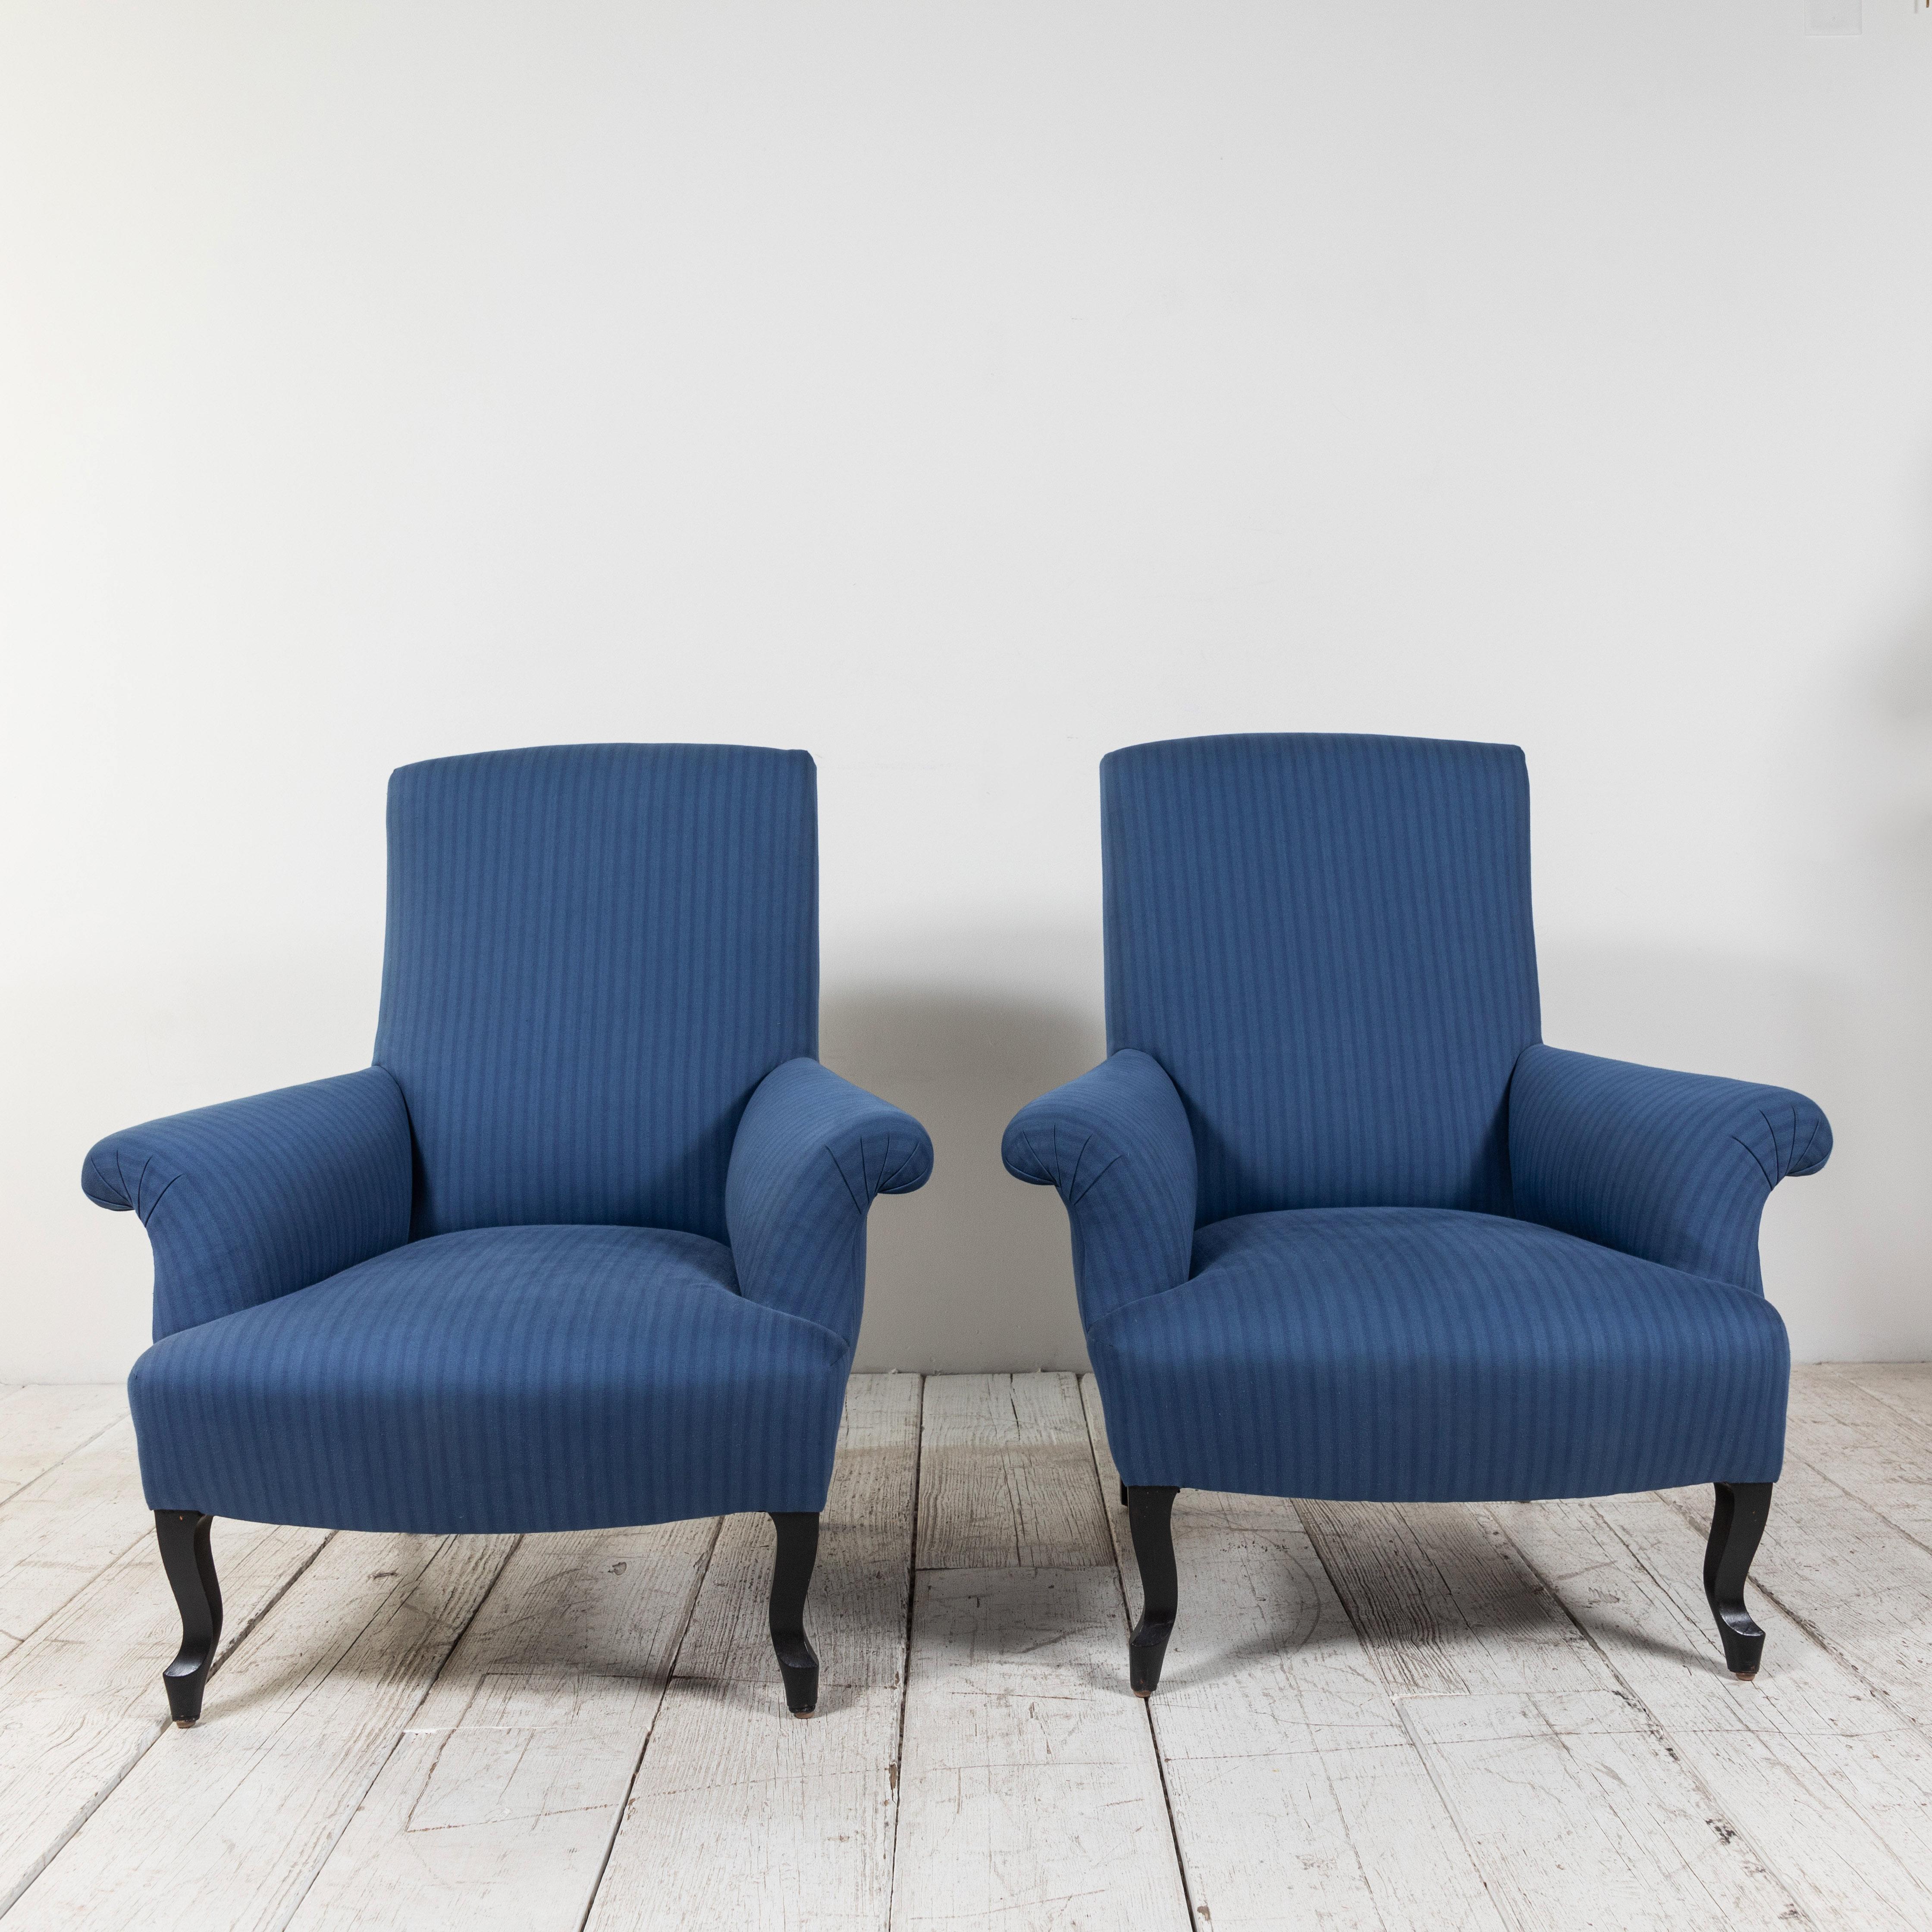 Classic pair of French rolled arm club chairs upholstered in tonal blue striped fabric from Howe of London. Original base finish boasts vintage flair.